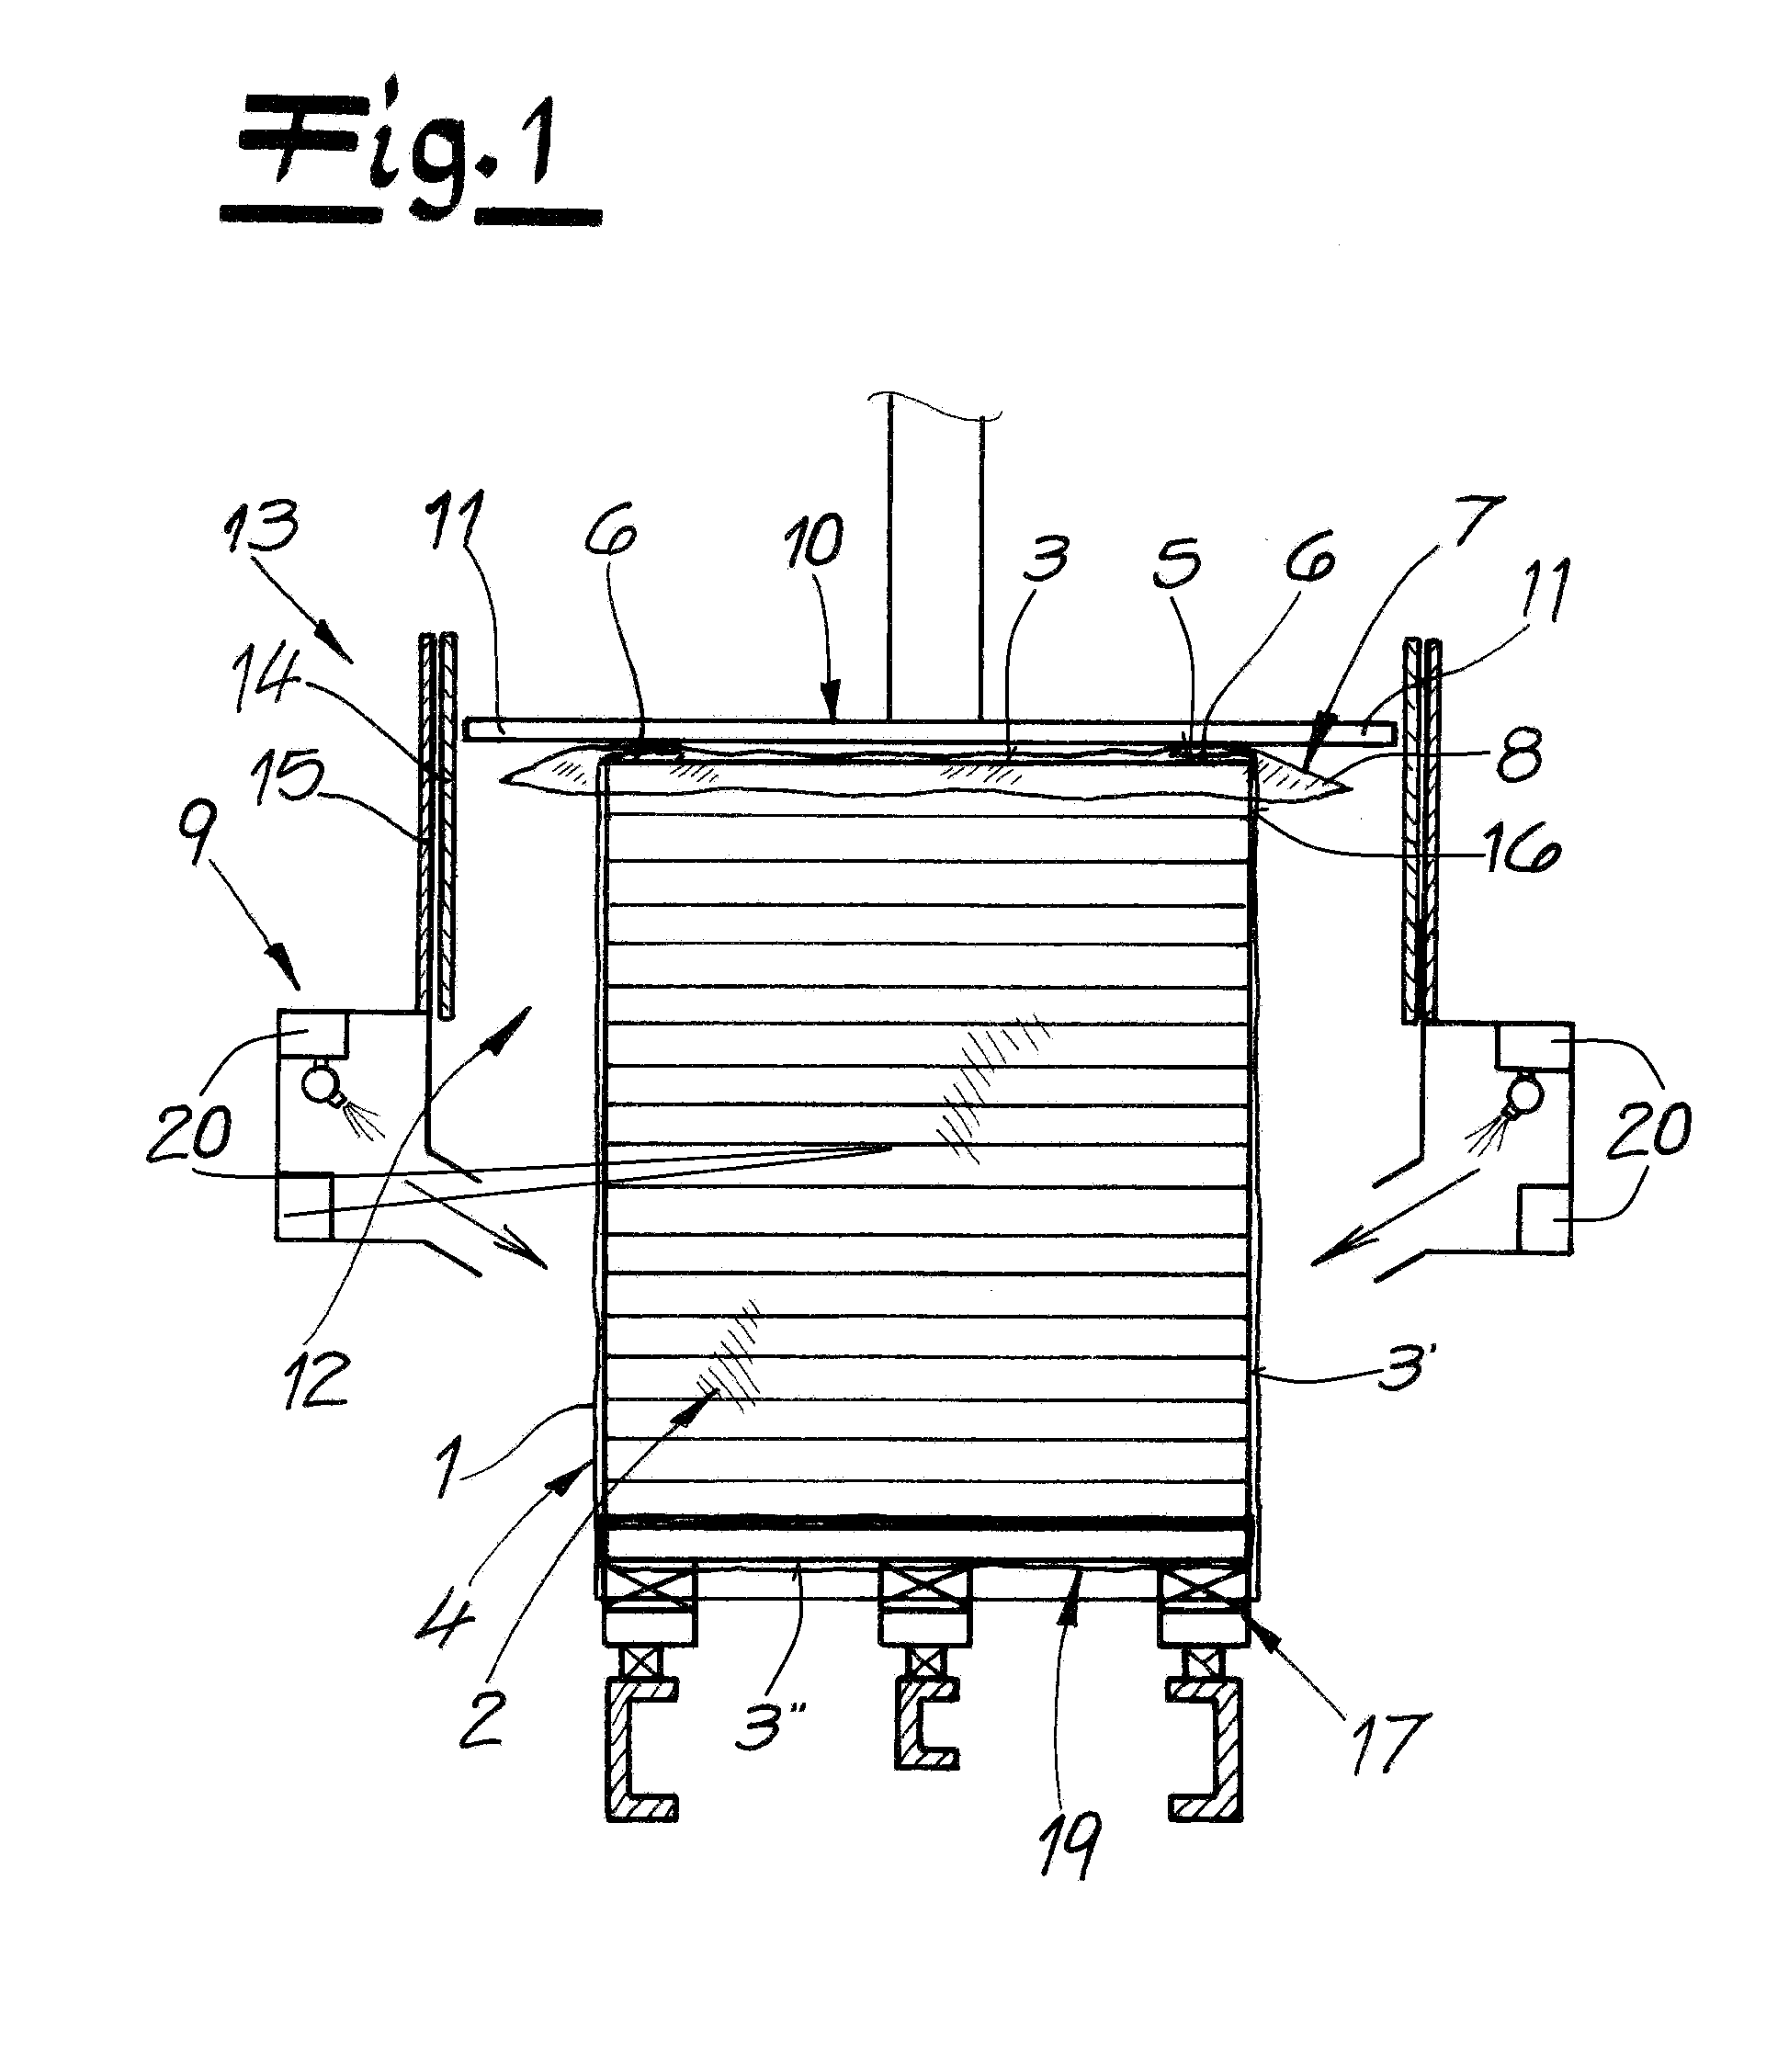 Method and apparatus for wrapping a film around an object